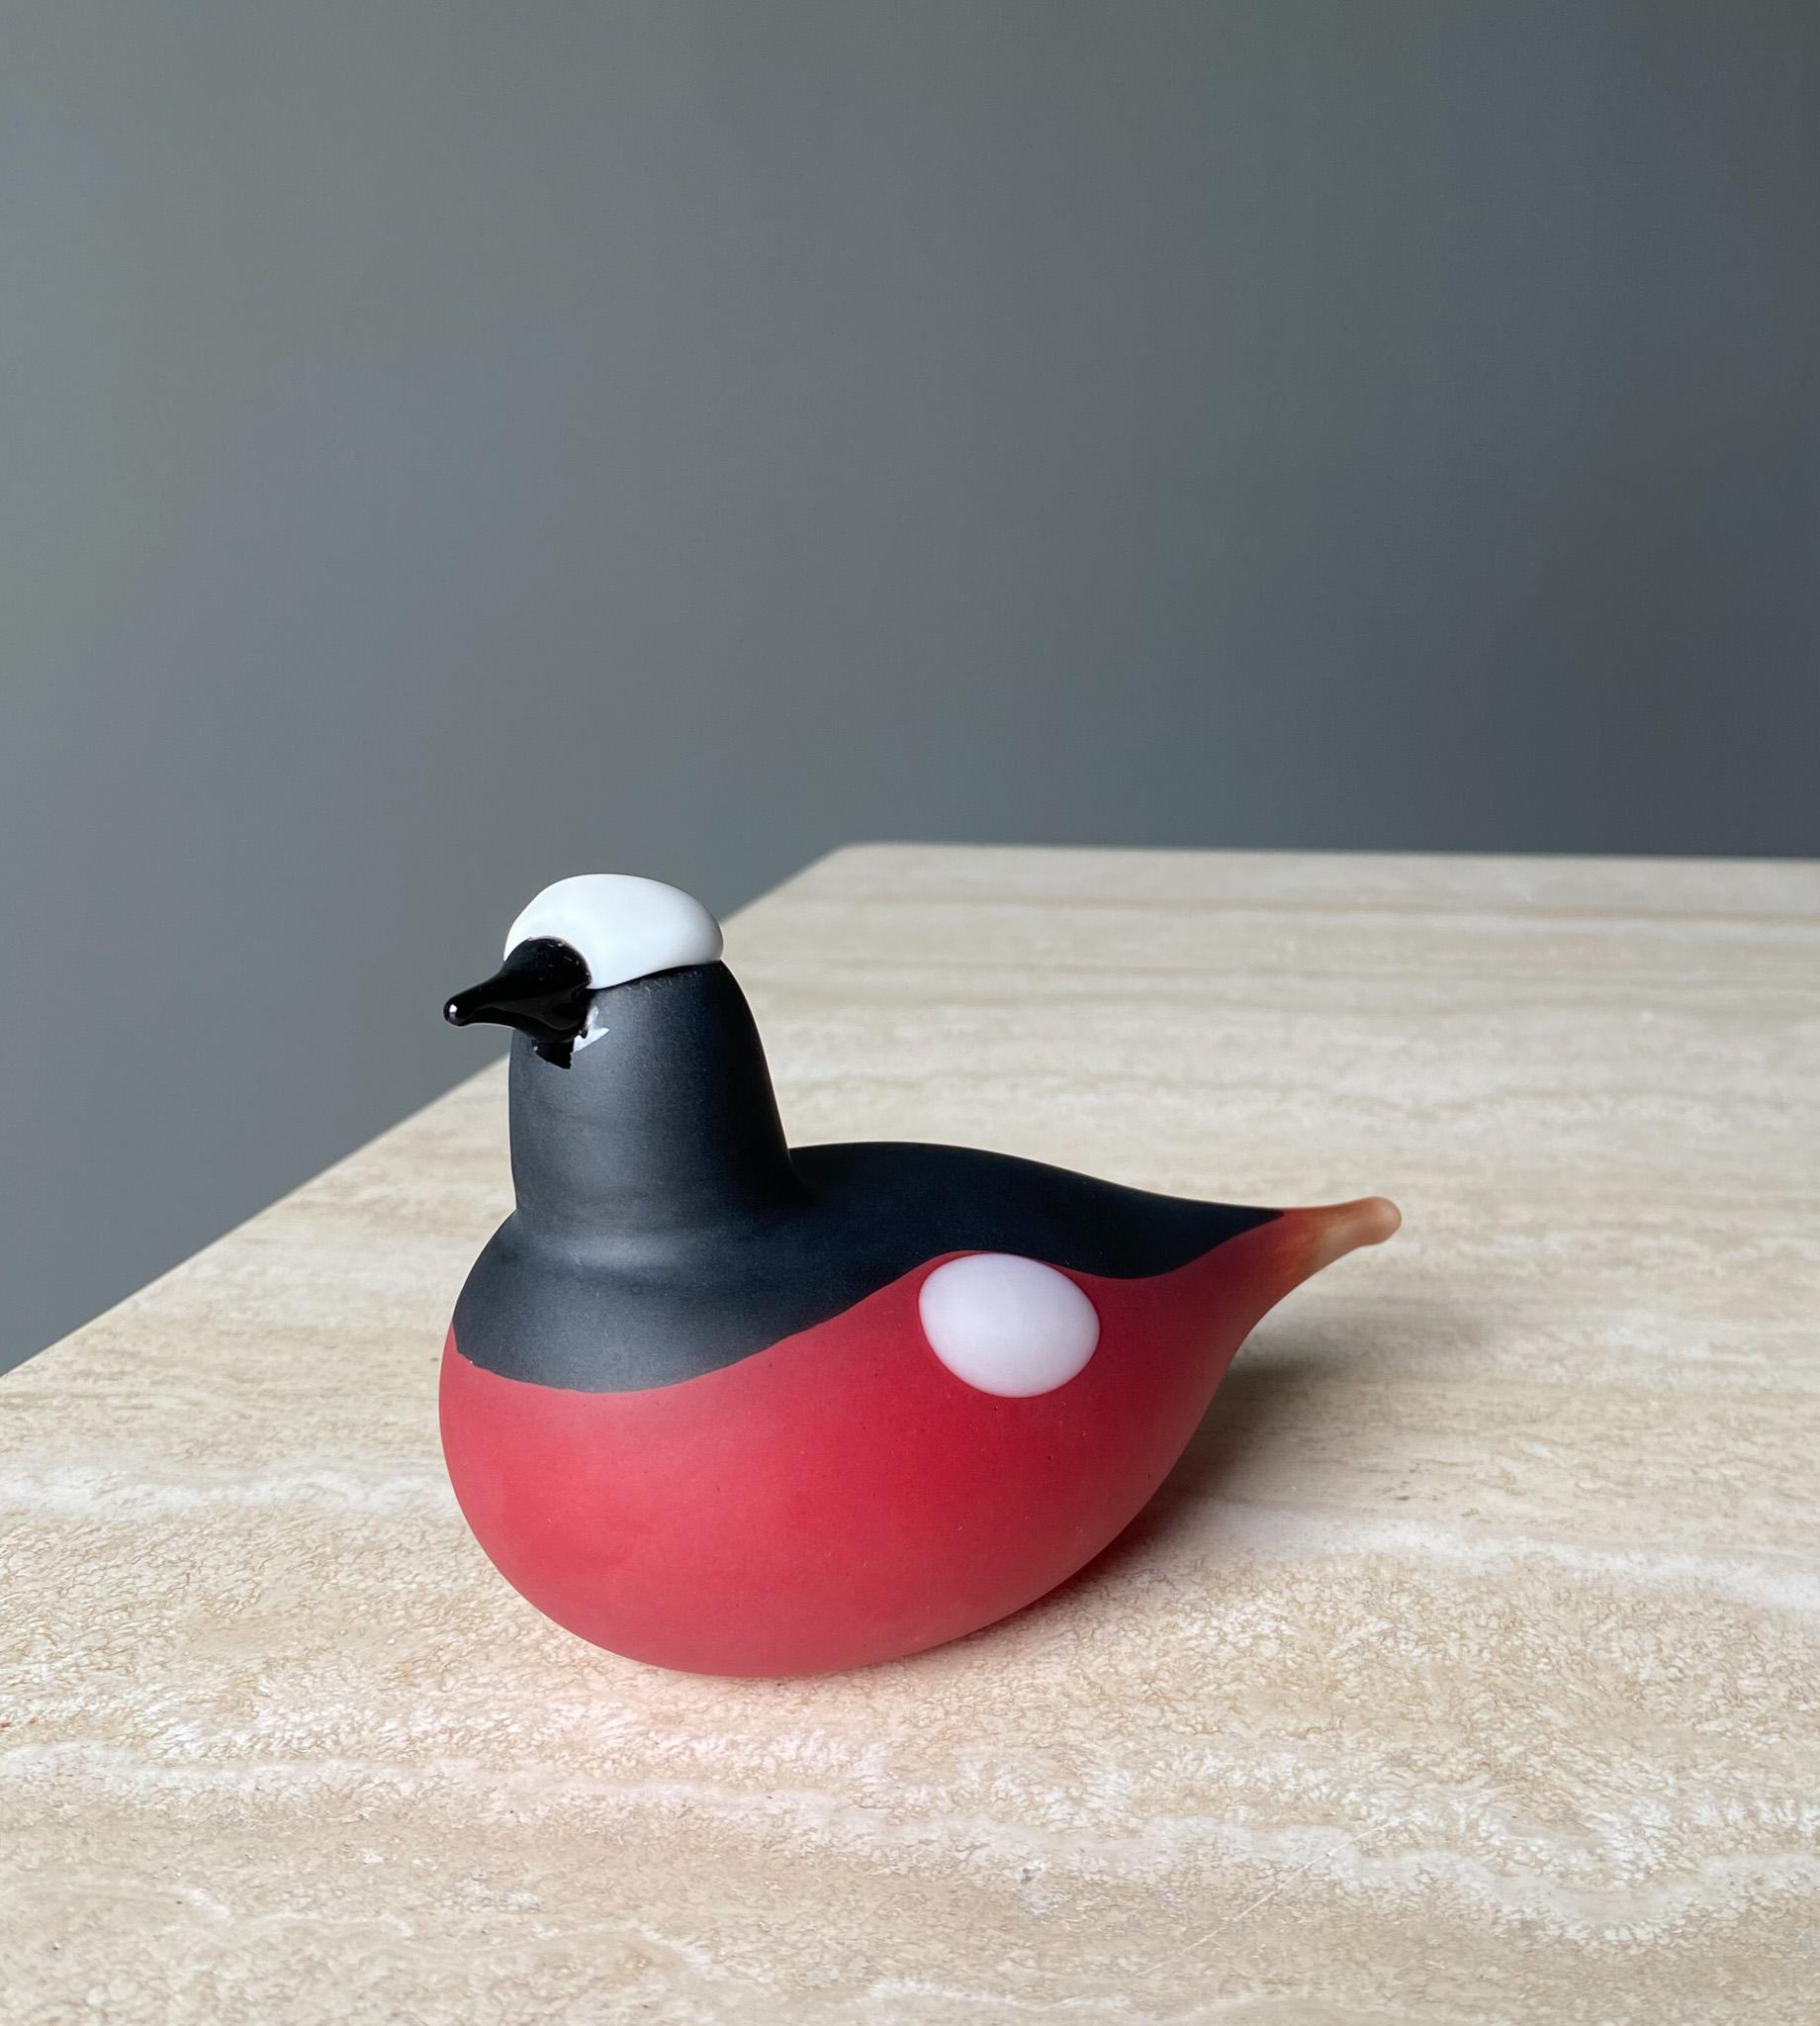 Oiva Toikka Art Glass Bird Sculpture for Iittala of Finland. This piece is had signed to the bottom. Retains its original packaging. 

Dimensions of the bird sculpture are 6 1/16'' wide by 2 3/4'' deep by 3 1/2'' tall.